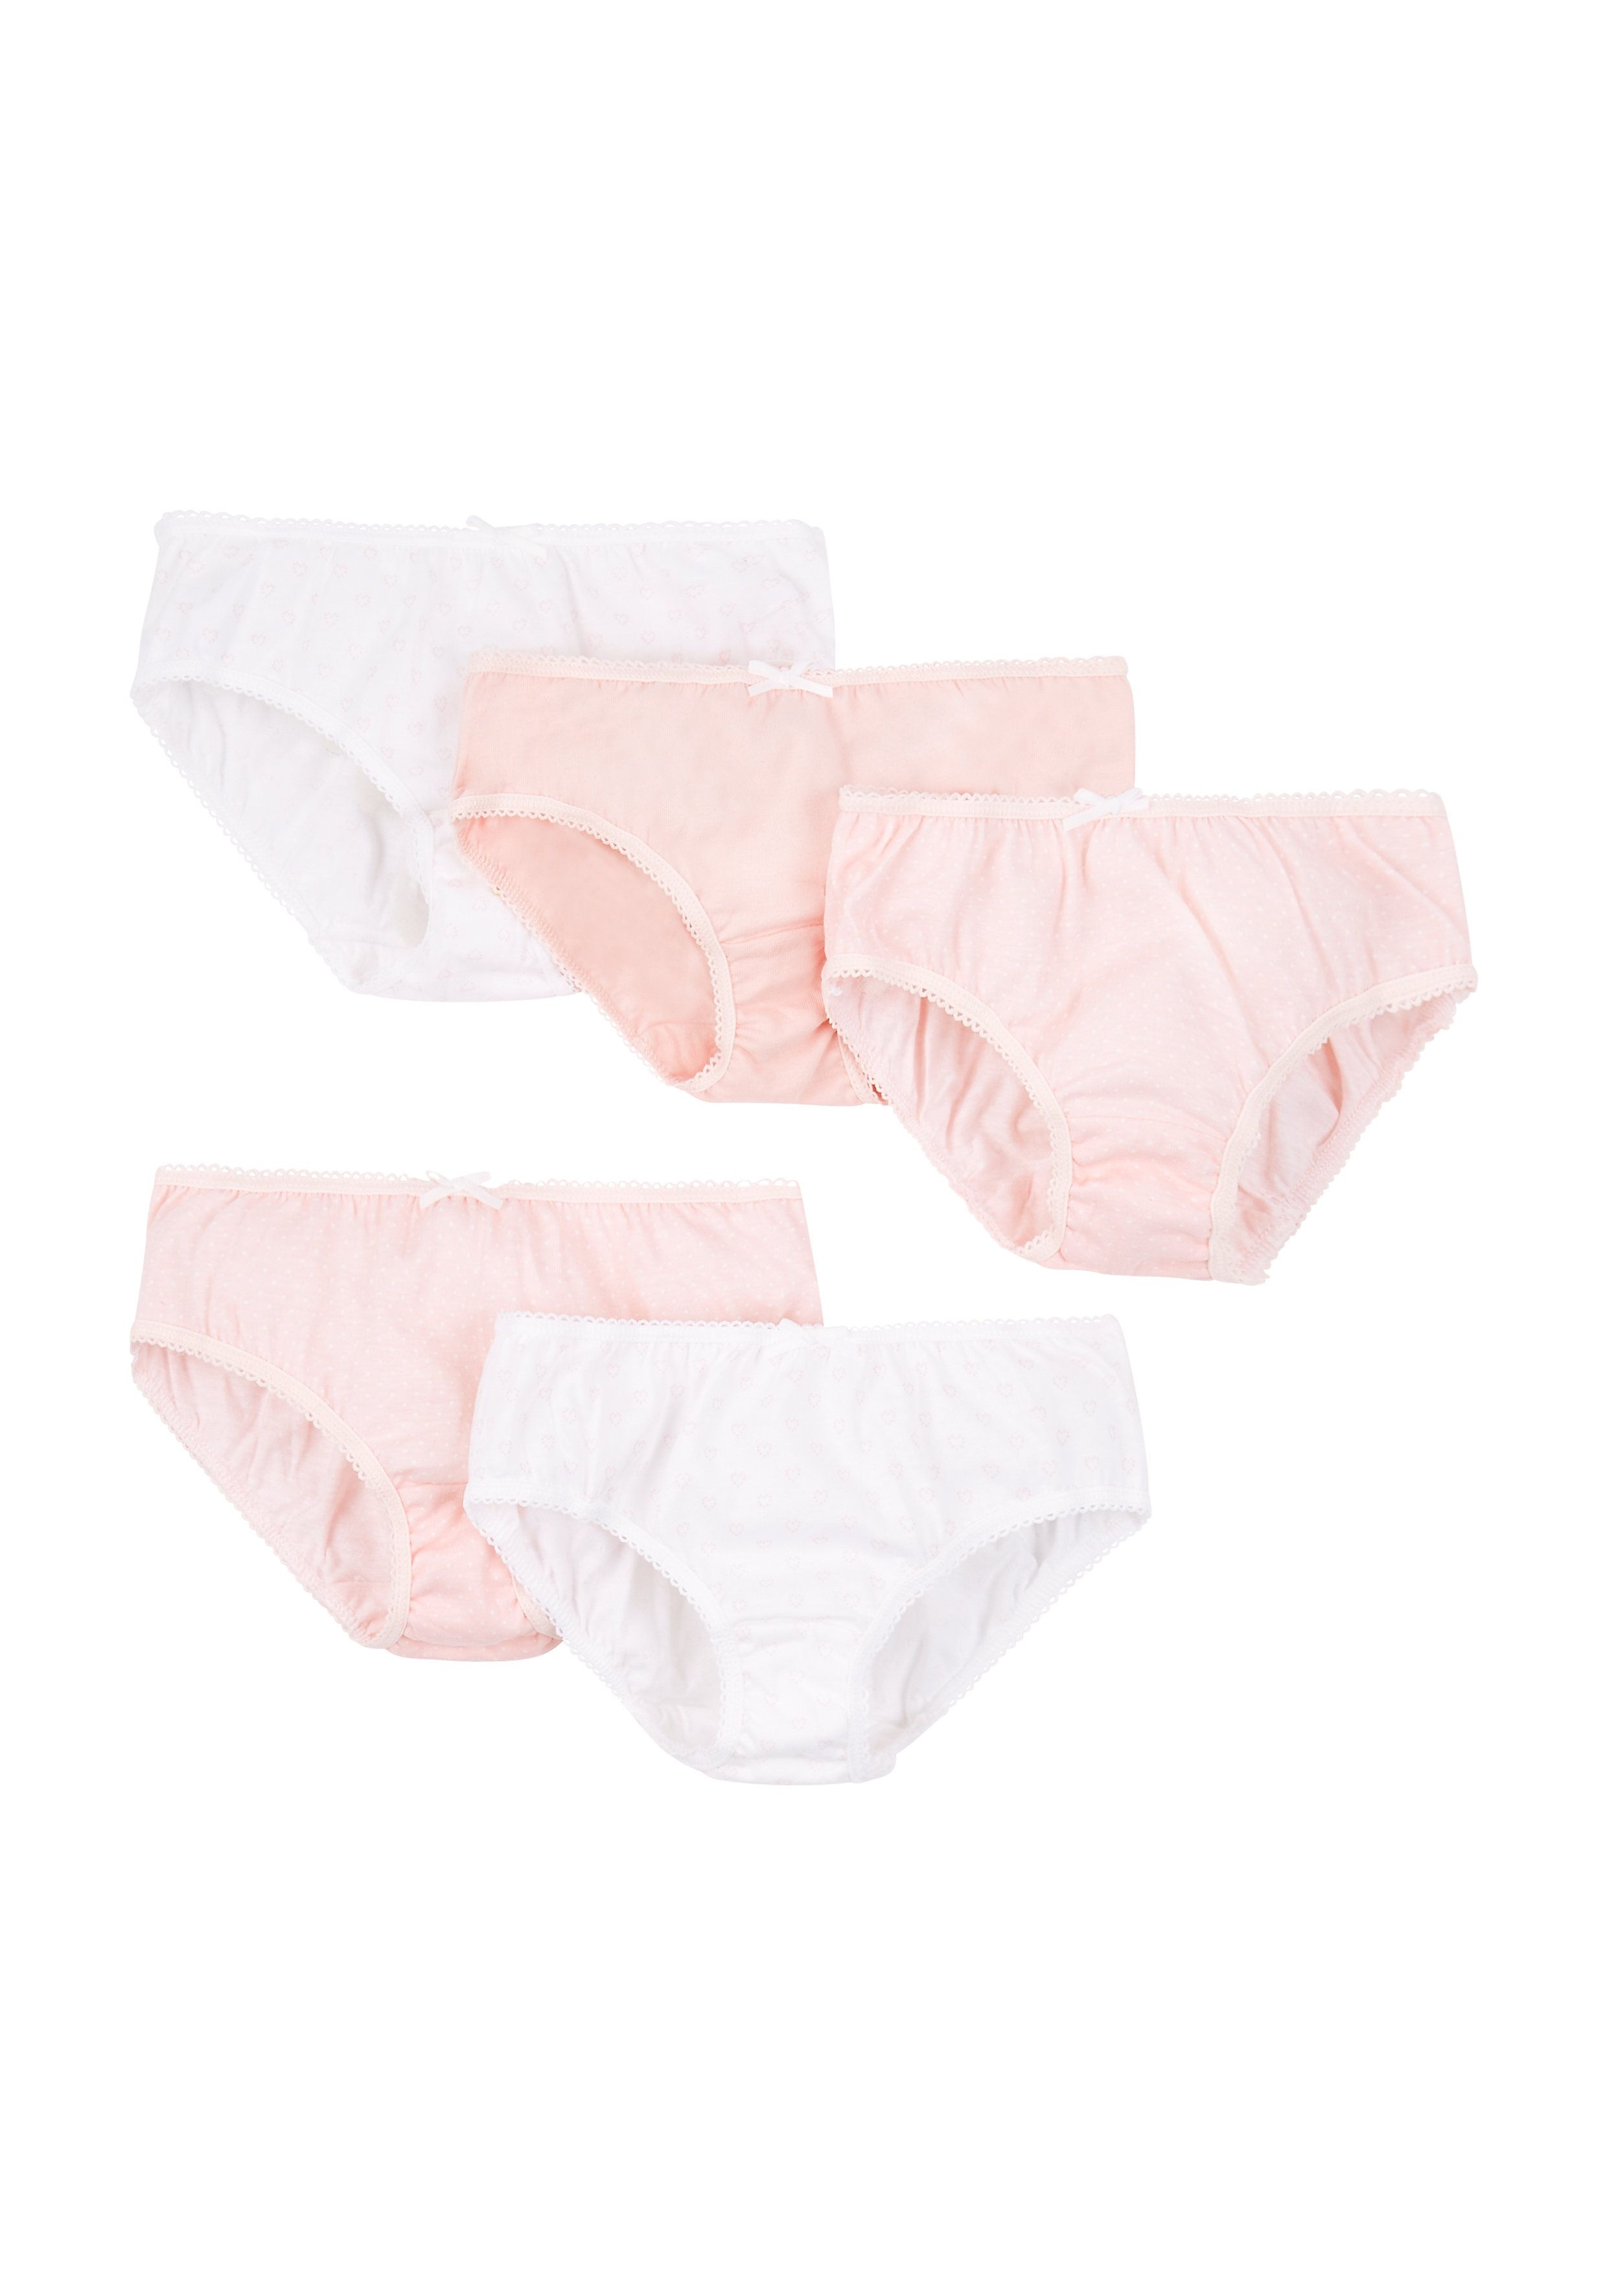 Mothercare | Girls Pink And White Briefs - 5 Pack - Multicolor 0